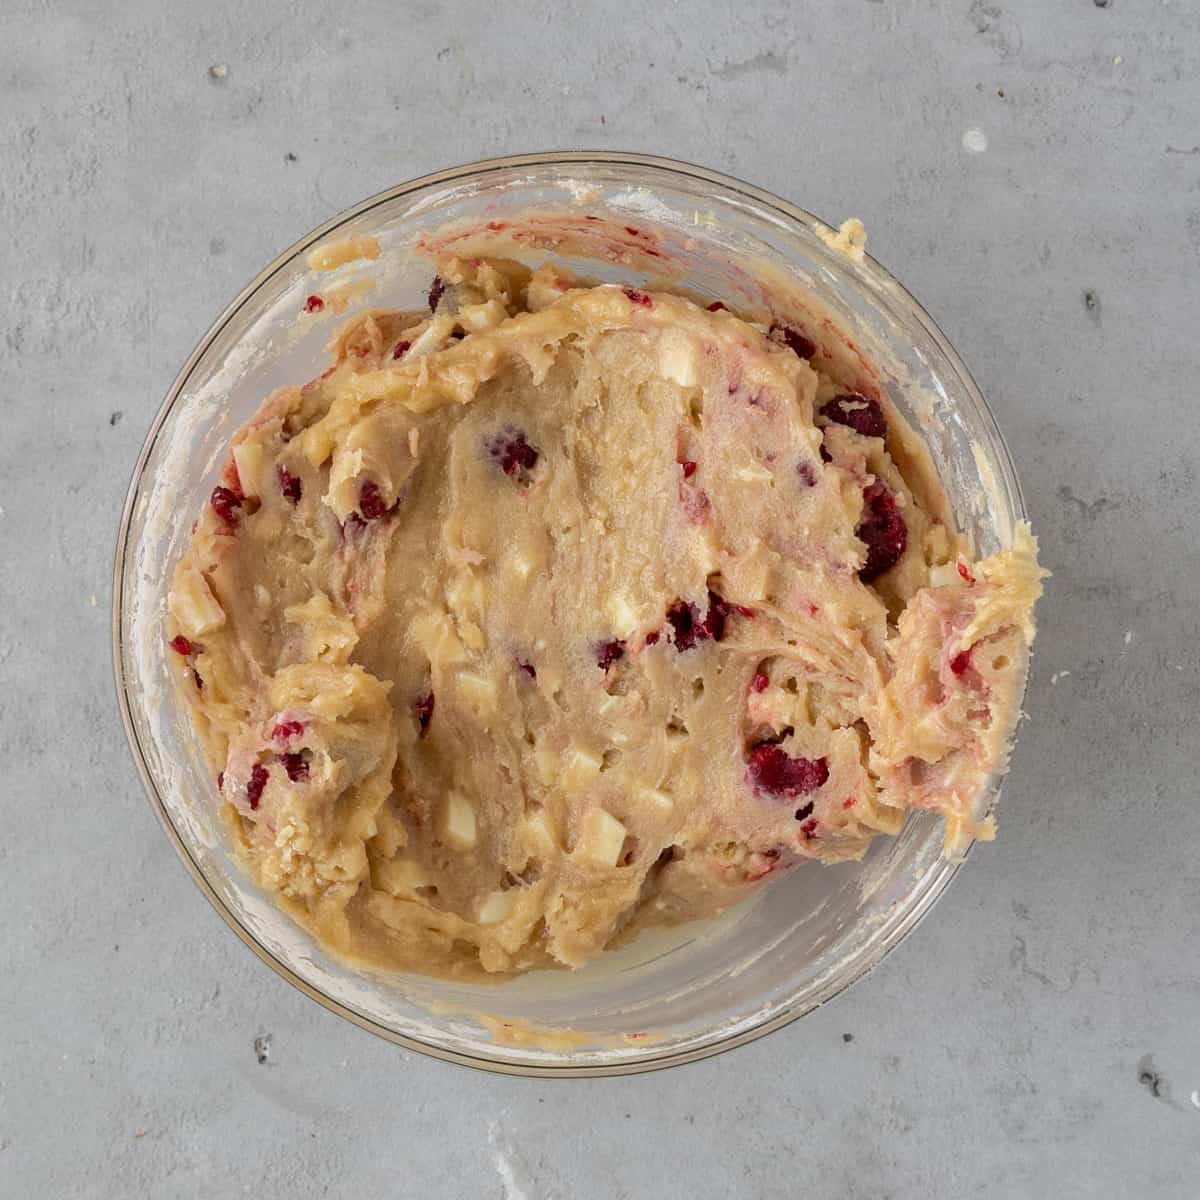 the completed blondie batter in a glass bowl on a grey background